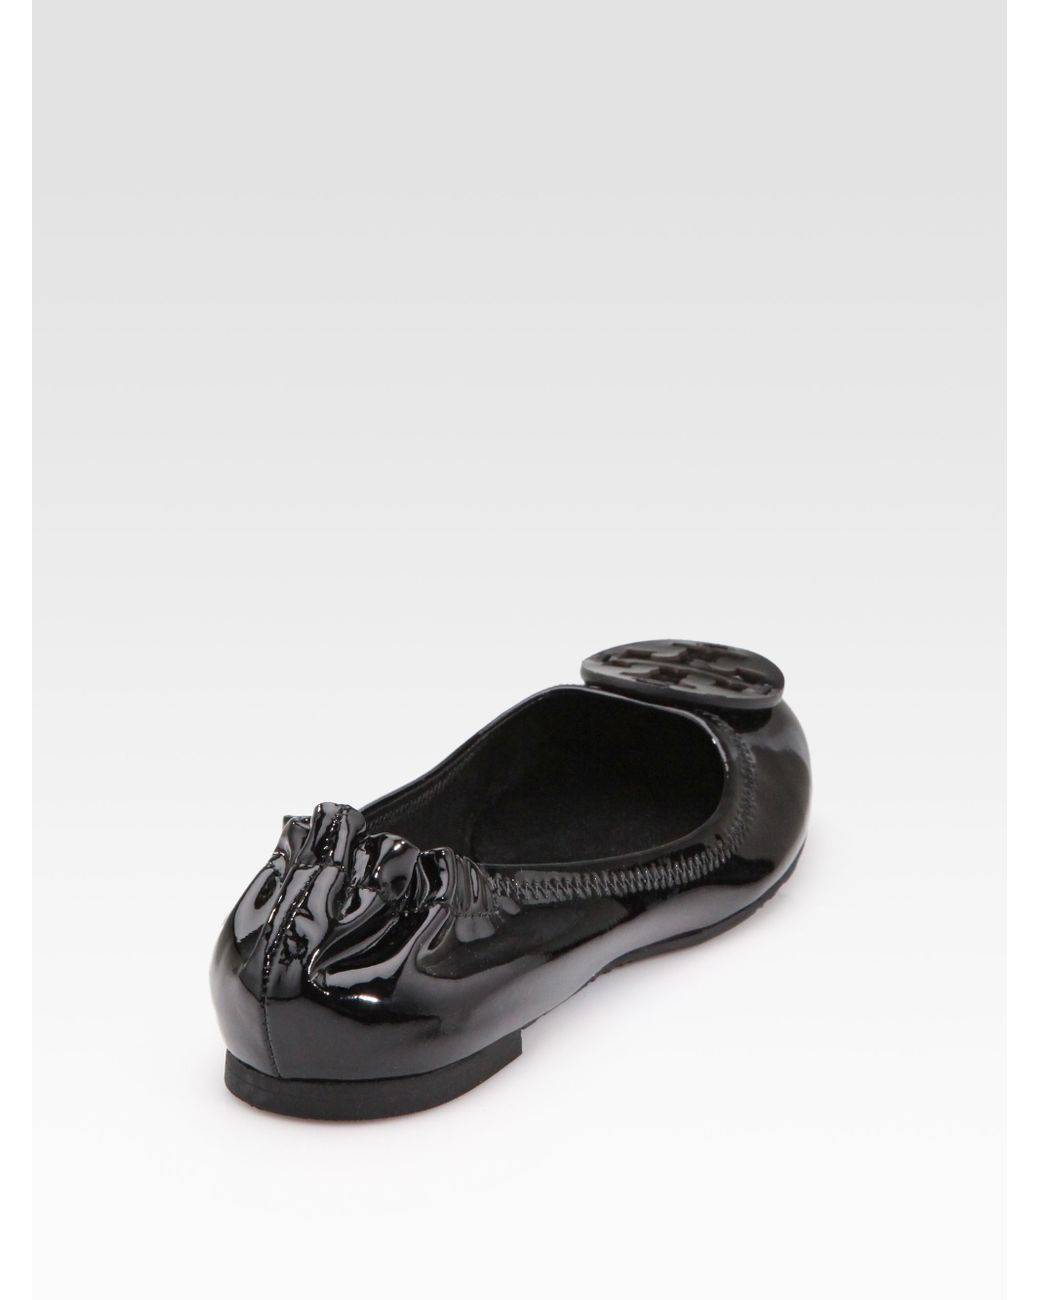 Tory Burch Reva Patent Leather Ballet Flats in Black | Lyst